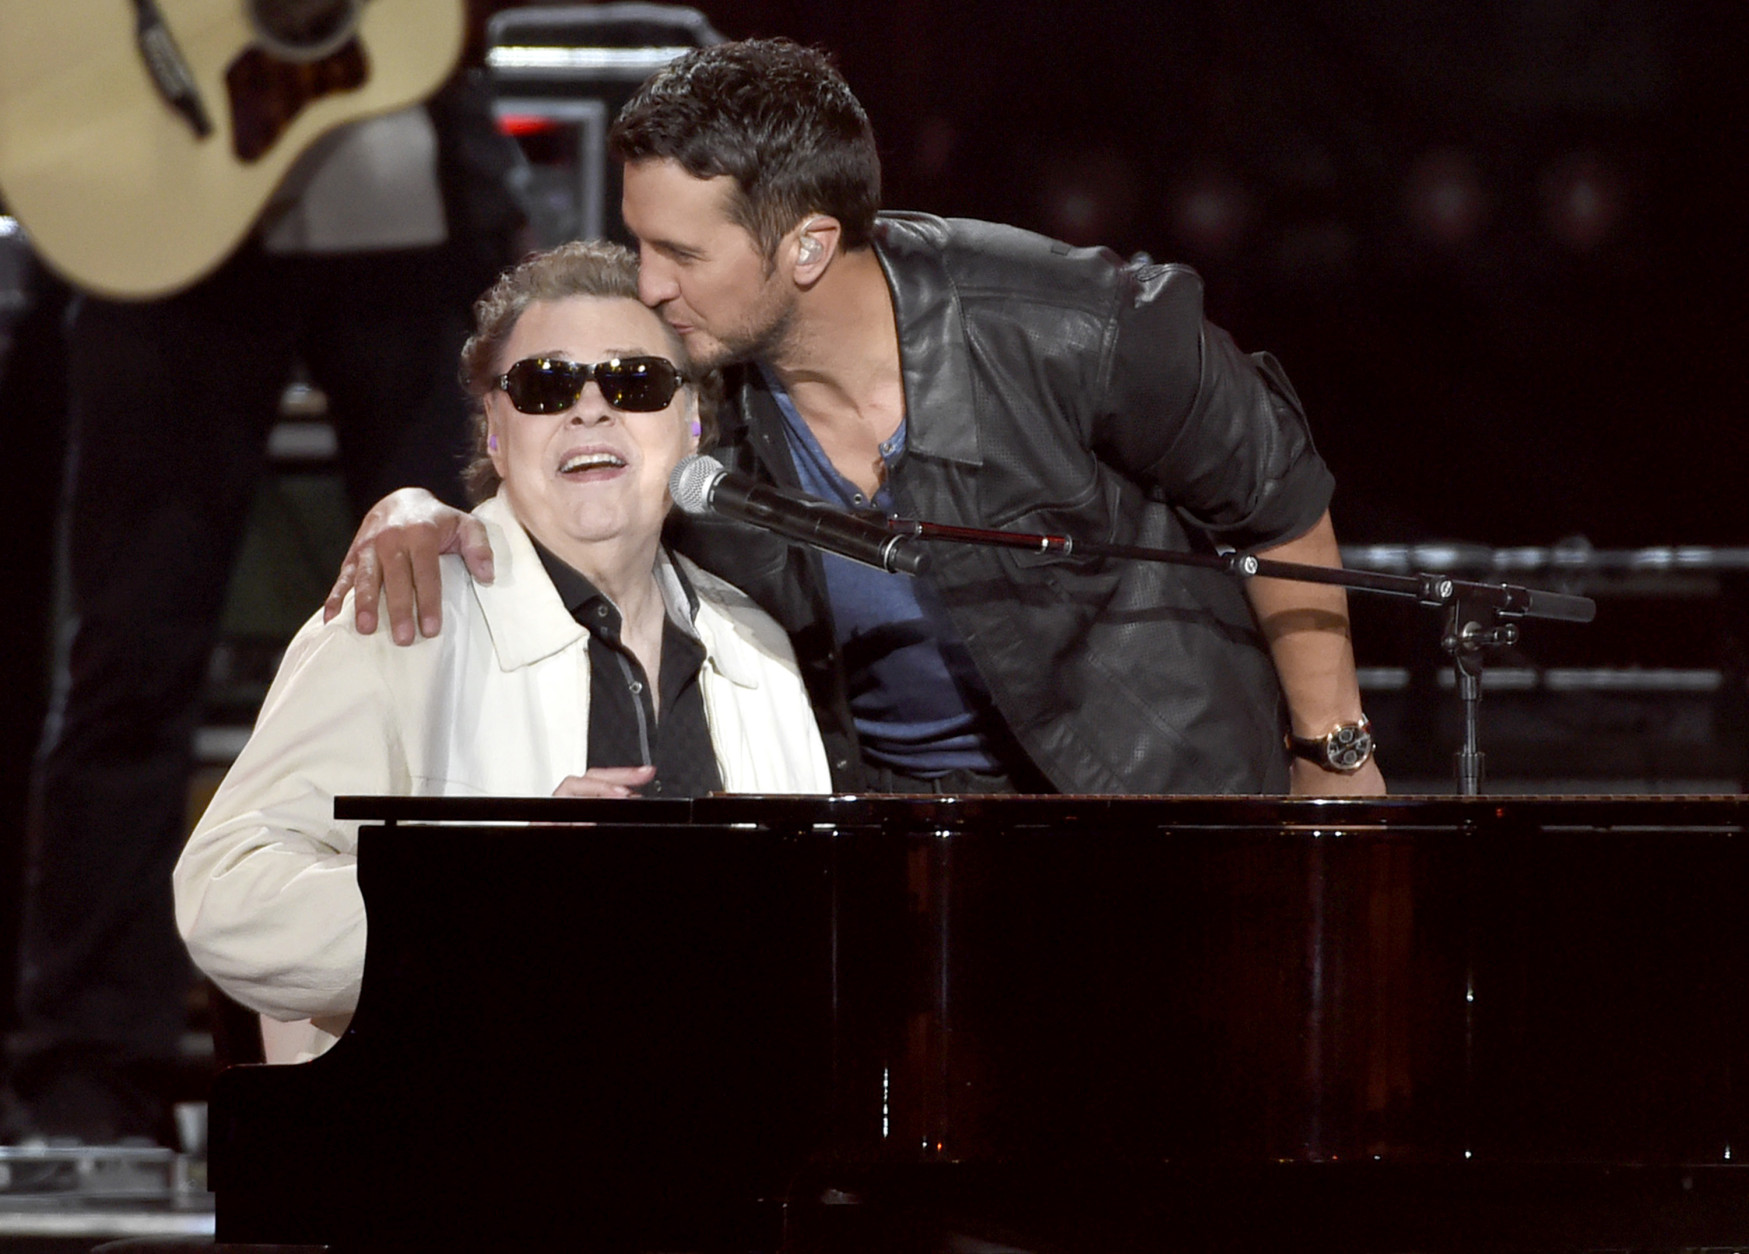 Luke Bryan, right, kisses Ronnie Milsap as they perform at ACM Presents Superstar Duets at Globe Life Park on Friday, April 17, 2015, in Arlington, Texas. (Photo by Chris Pizzello/Invision/AP)